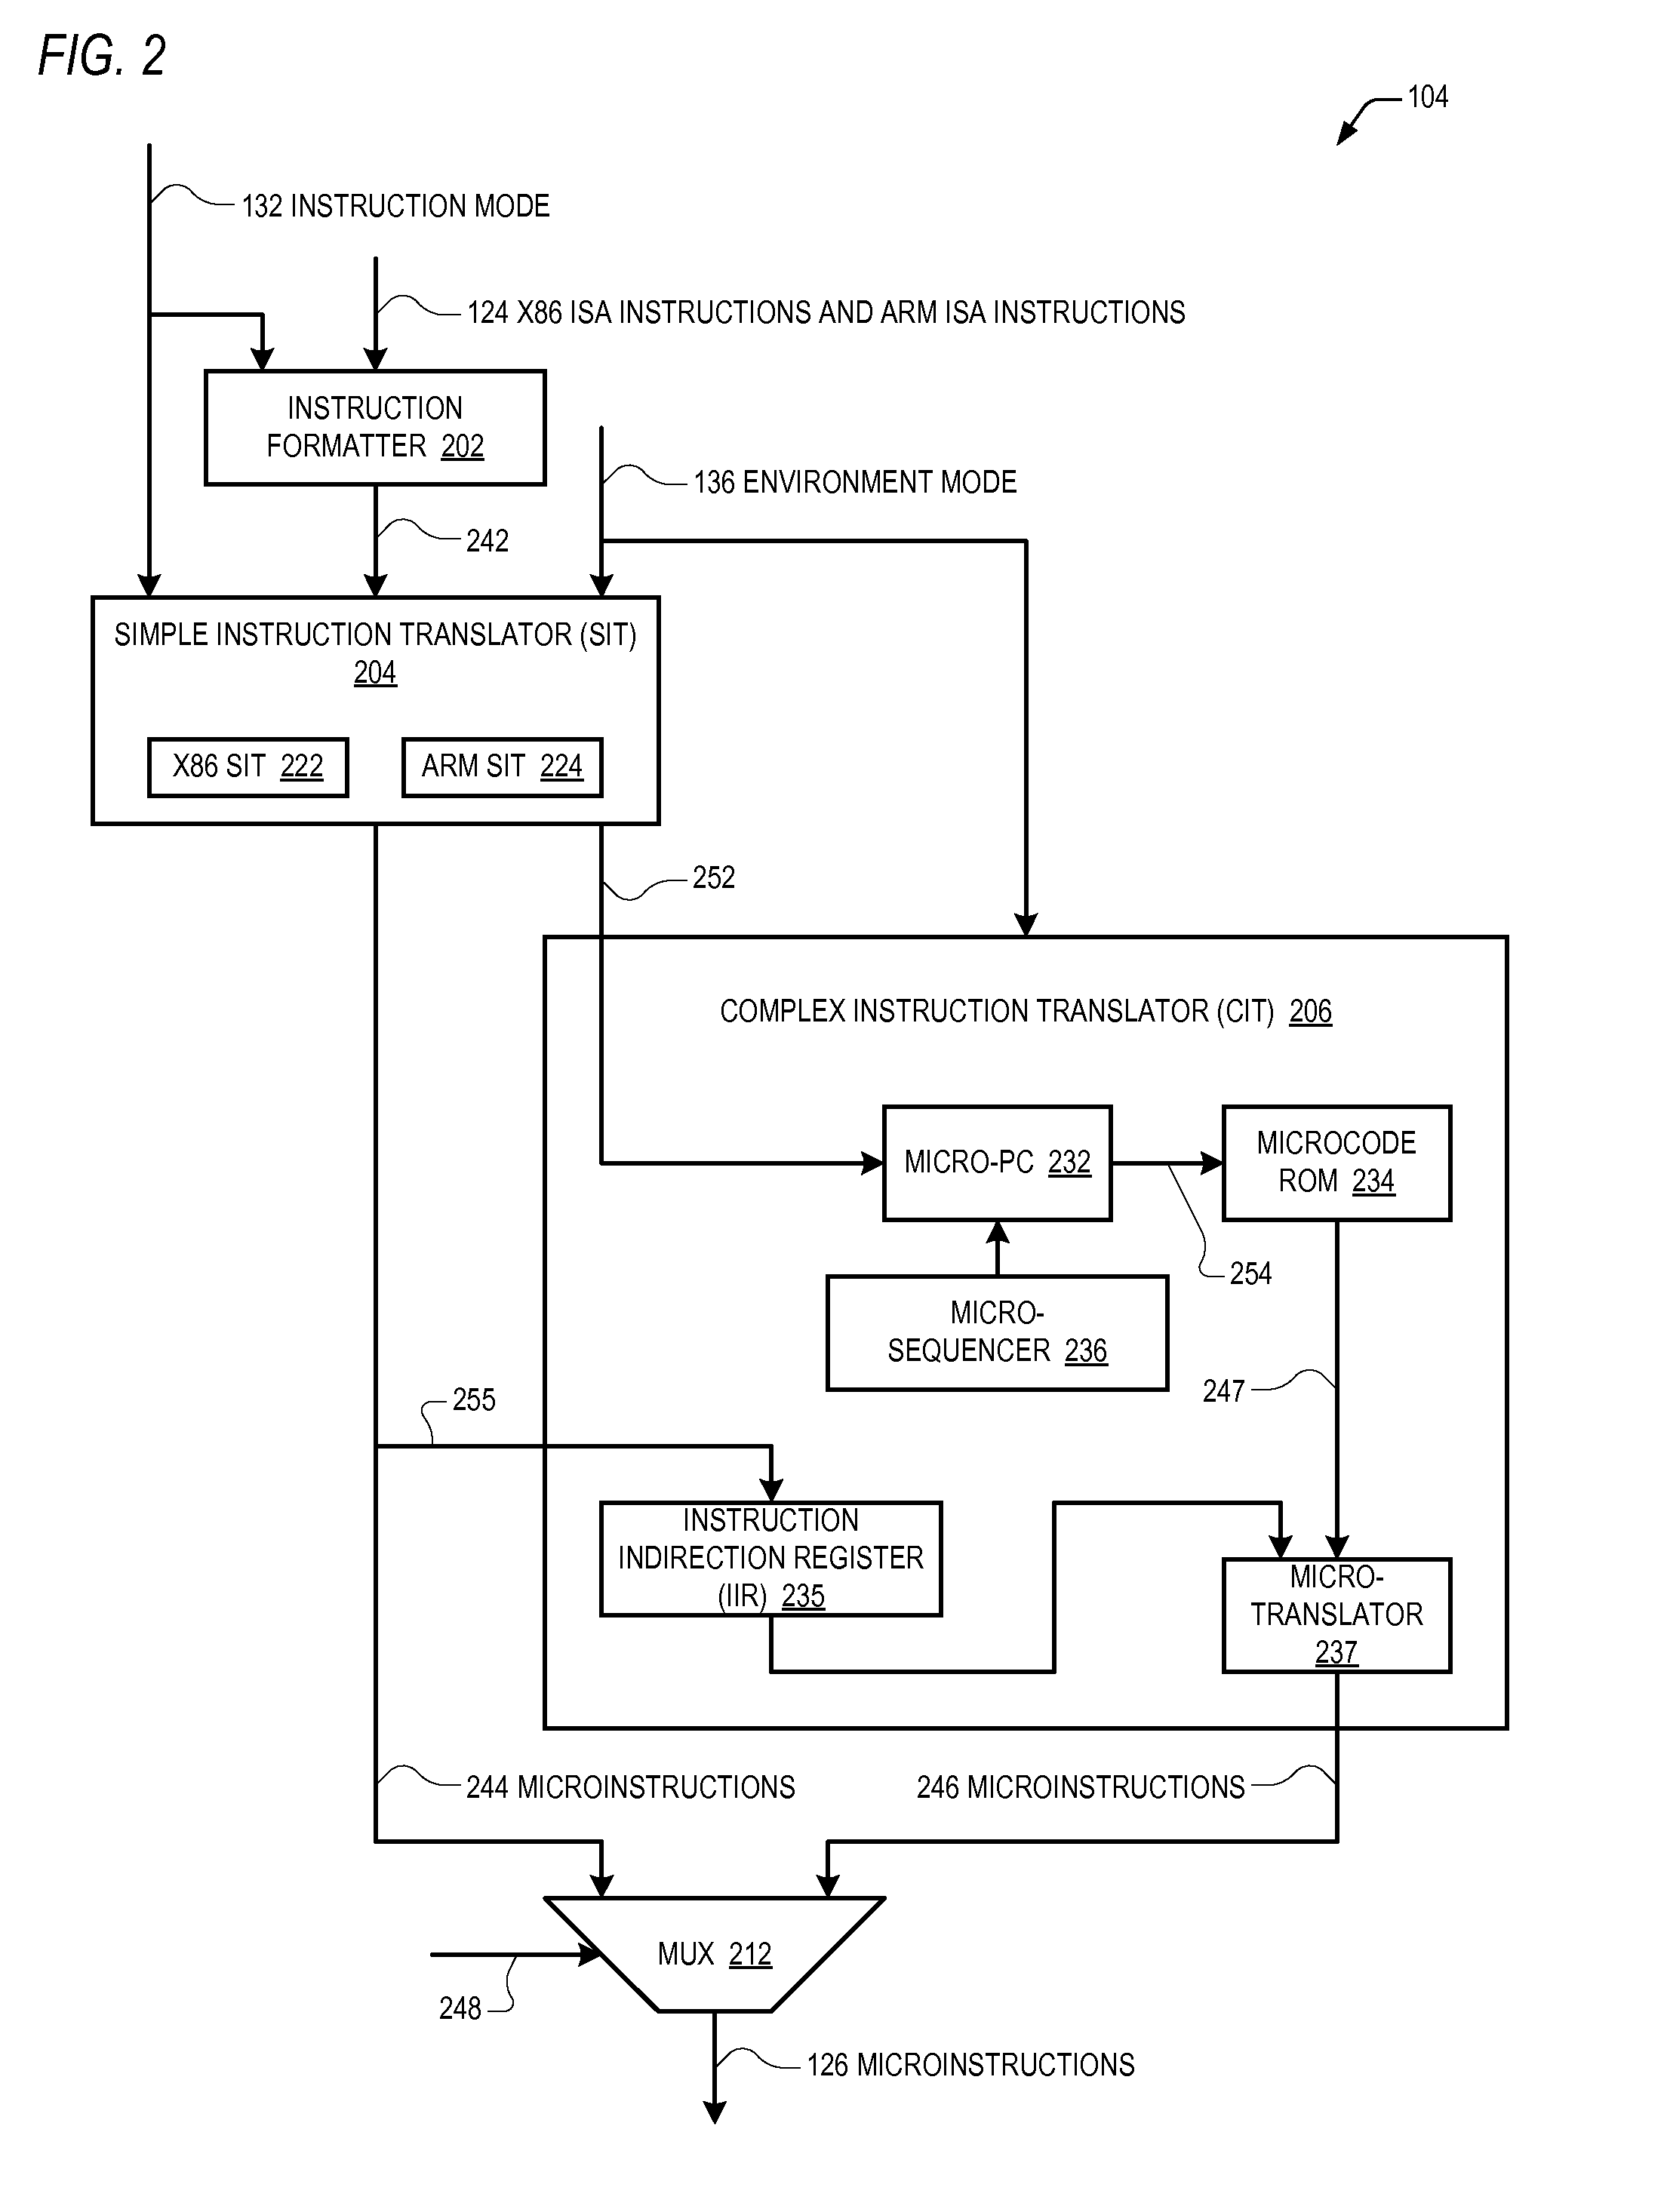 Heterogeneous isa microprocessor with shared hardware isa registers